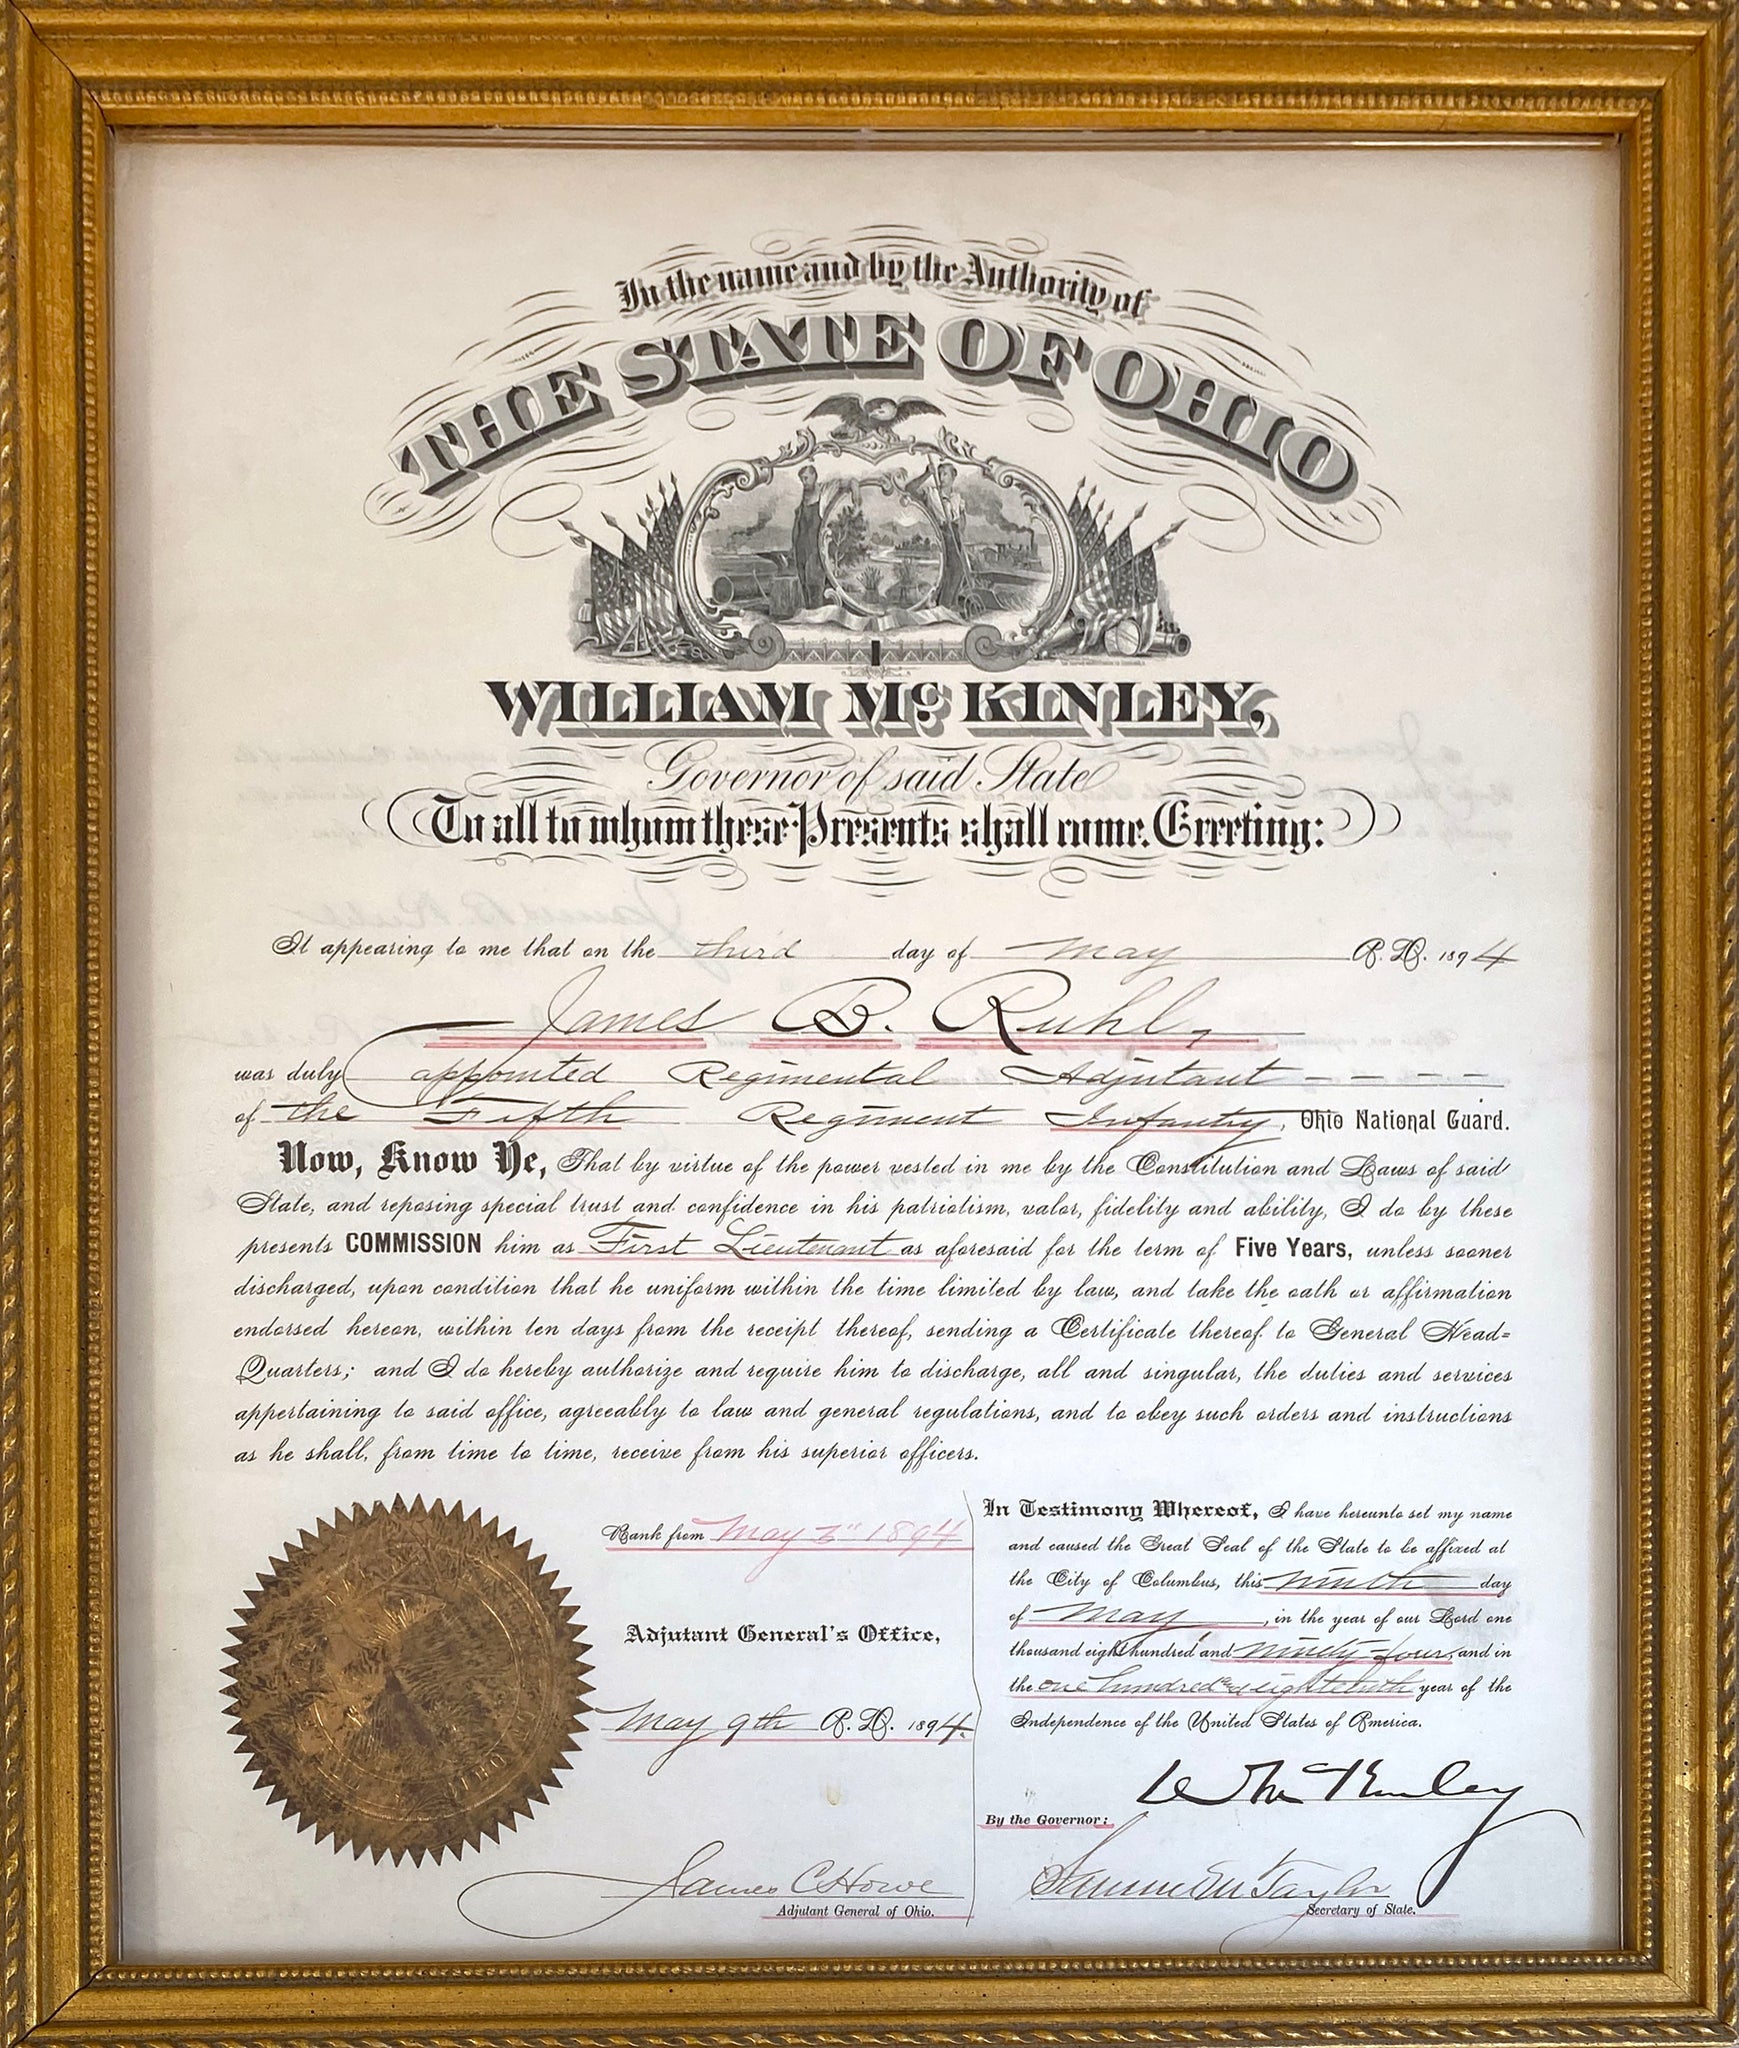 WILLIAM MCKINLEY - 25TH PRESIDENT OF THE UNITED STATES - AUTOGRAPHED 1894 MILITARY APPOINTMENT